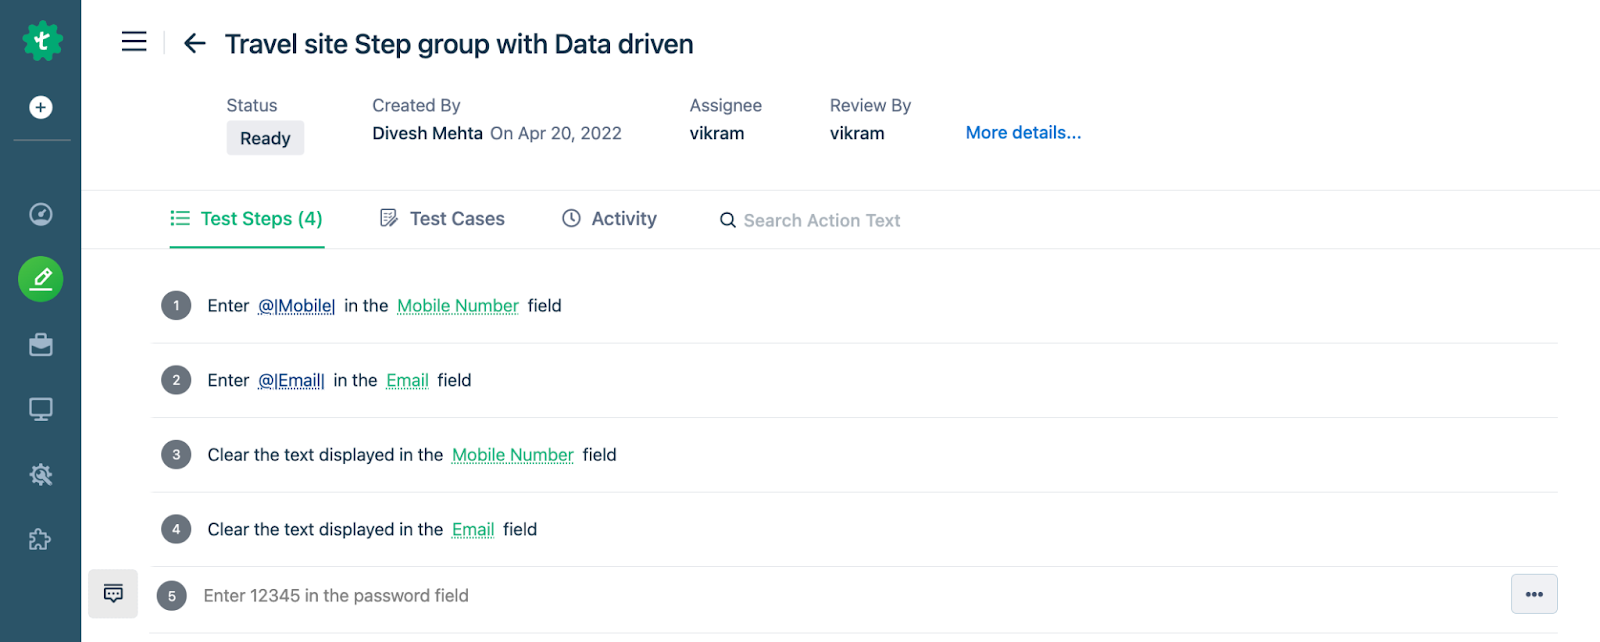 Data Driven Step Group Details